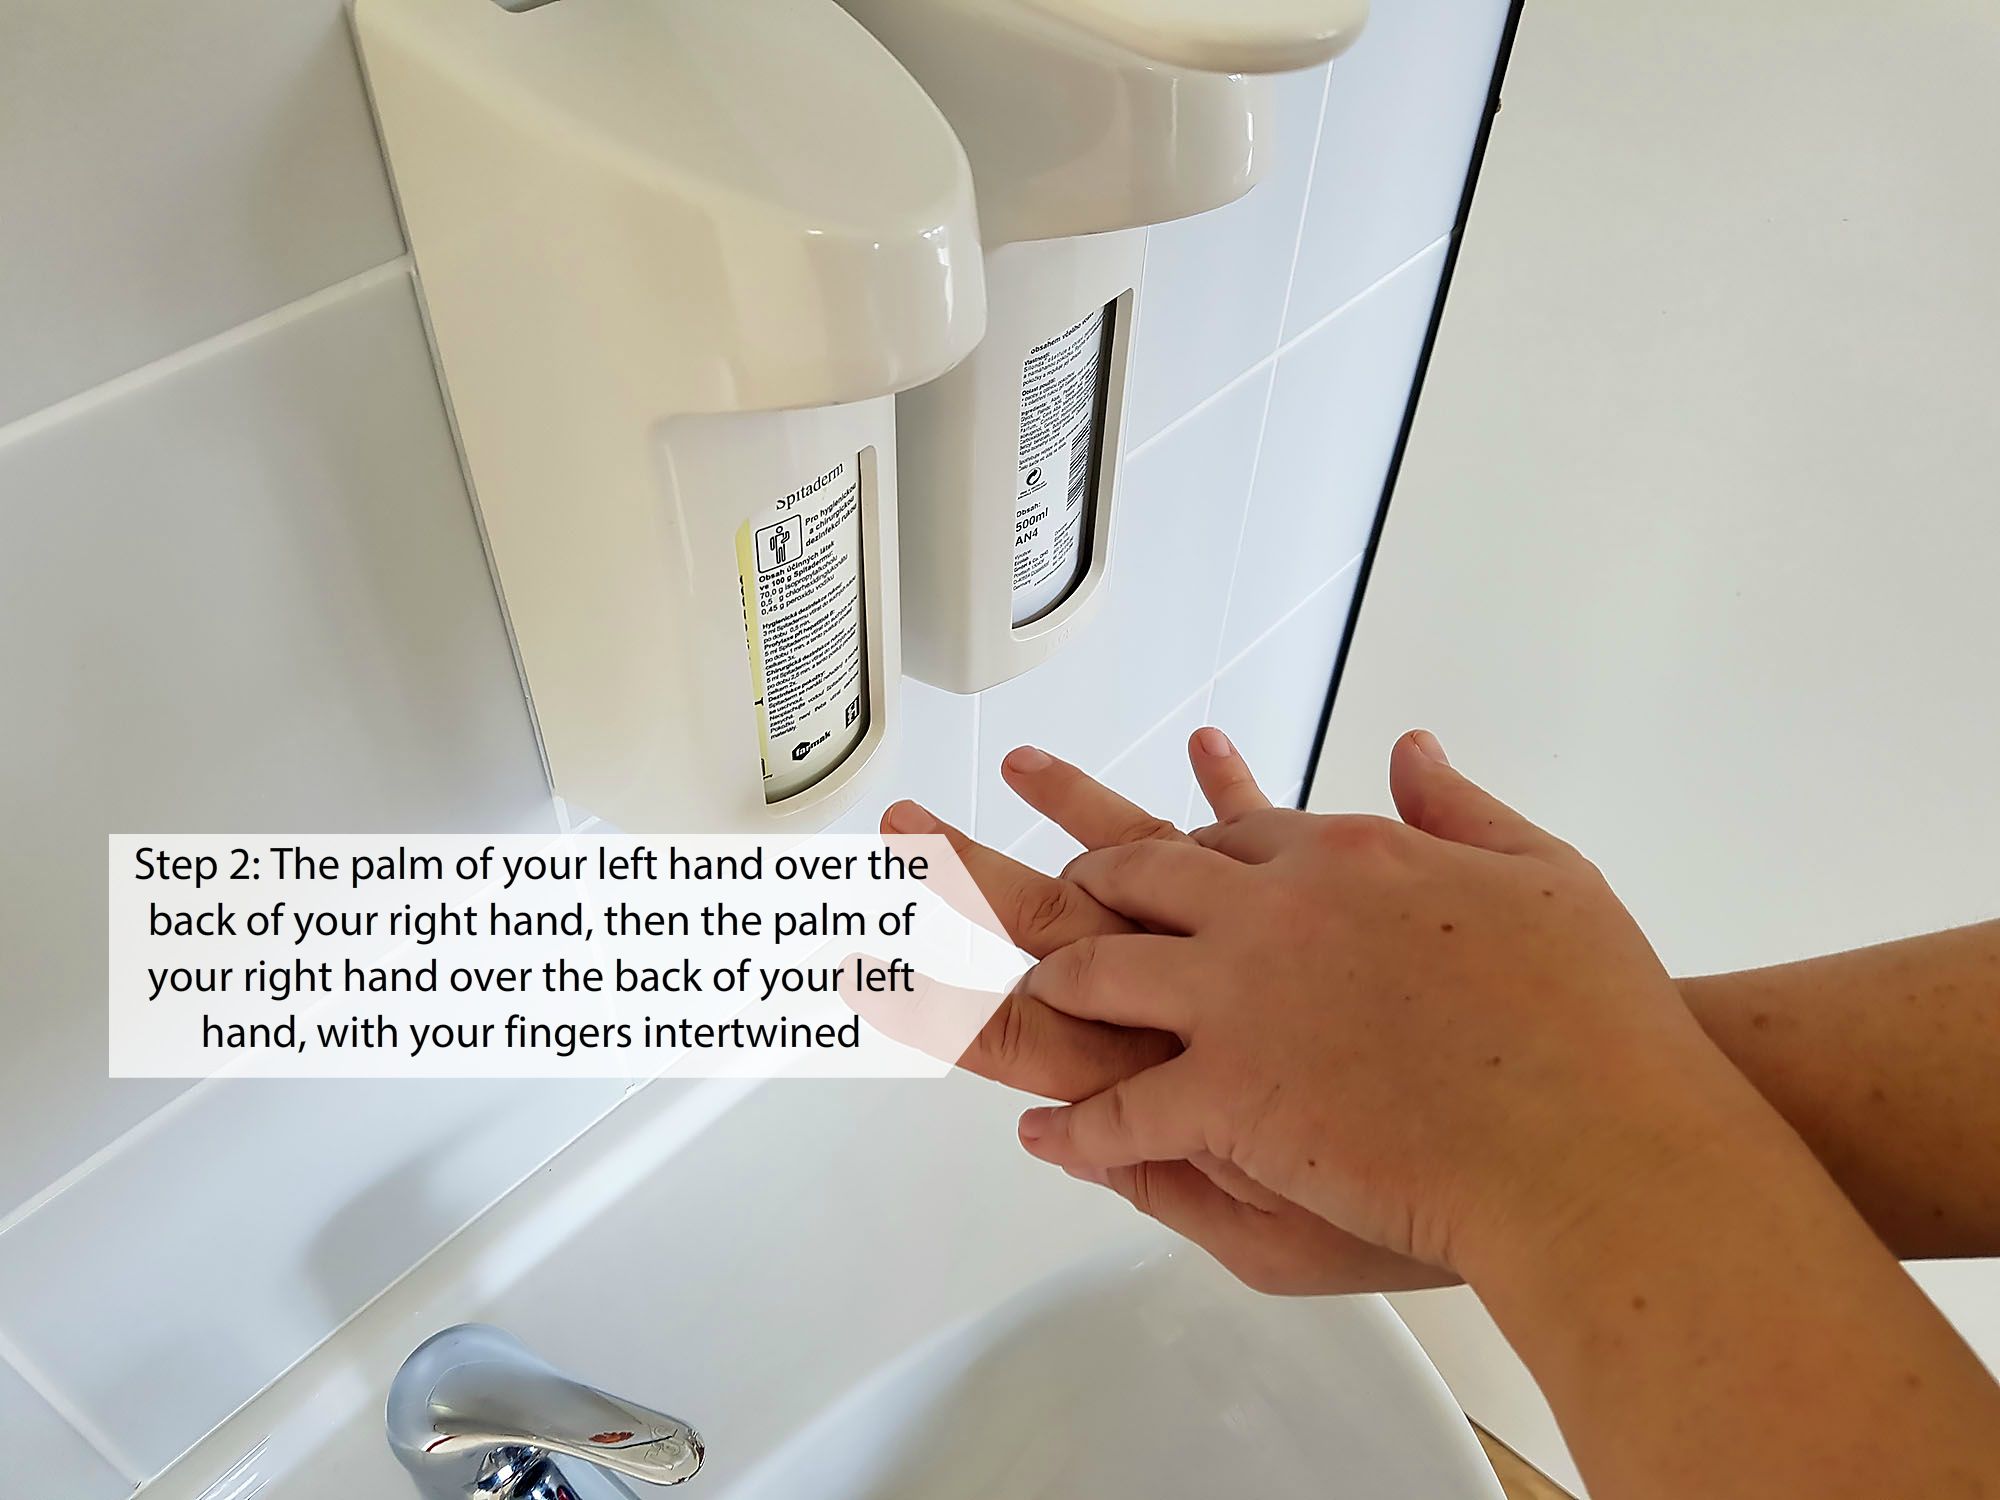 Procedure for rubbing the disinfectant solution during hygienic hand disinfection (Step 2)